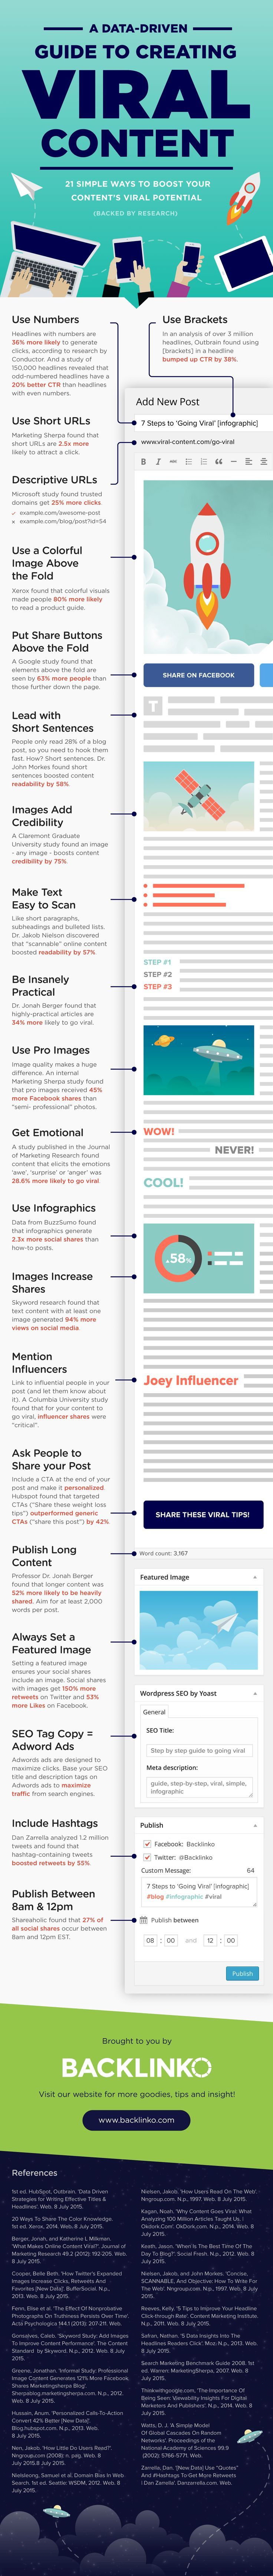 1529682017_169_Marketing-Infographic-Content-marketing-tips-Dreaming-of-viral-content-that-takes-off-and-is-seen-by Marketing Infographic : Content marketing tips: Dreaming of viral content that takes off and is seen by ...